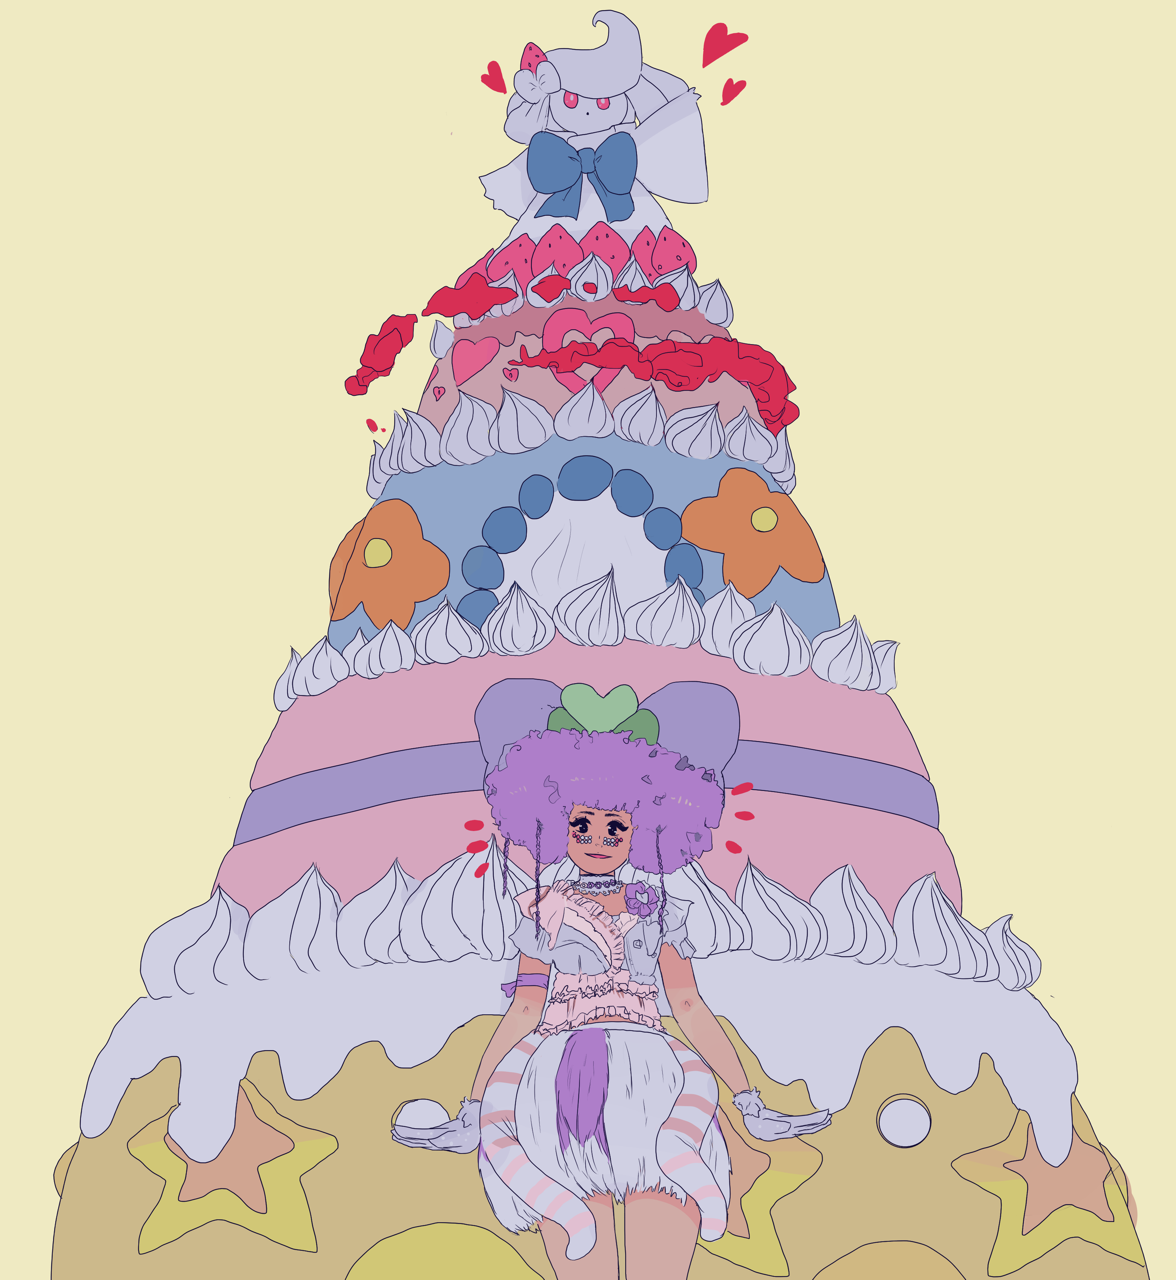 Alcremie reminds me of the giant cake in the...